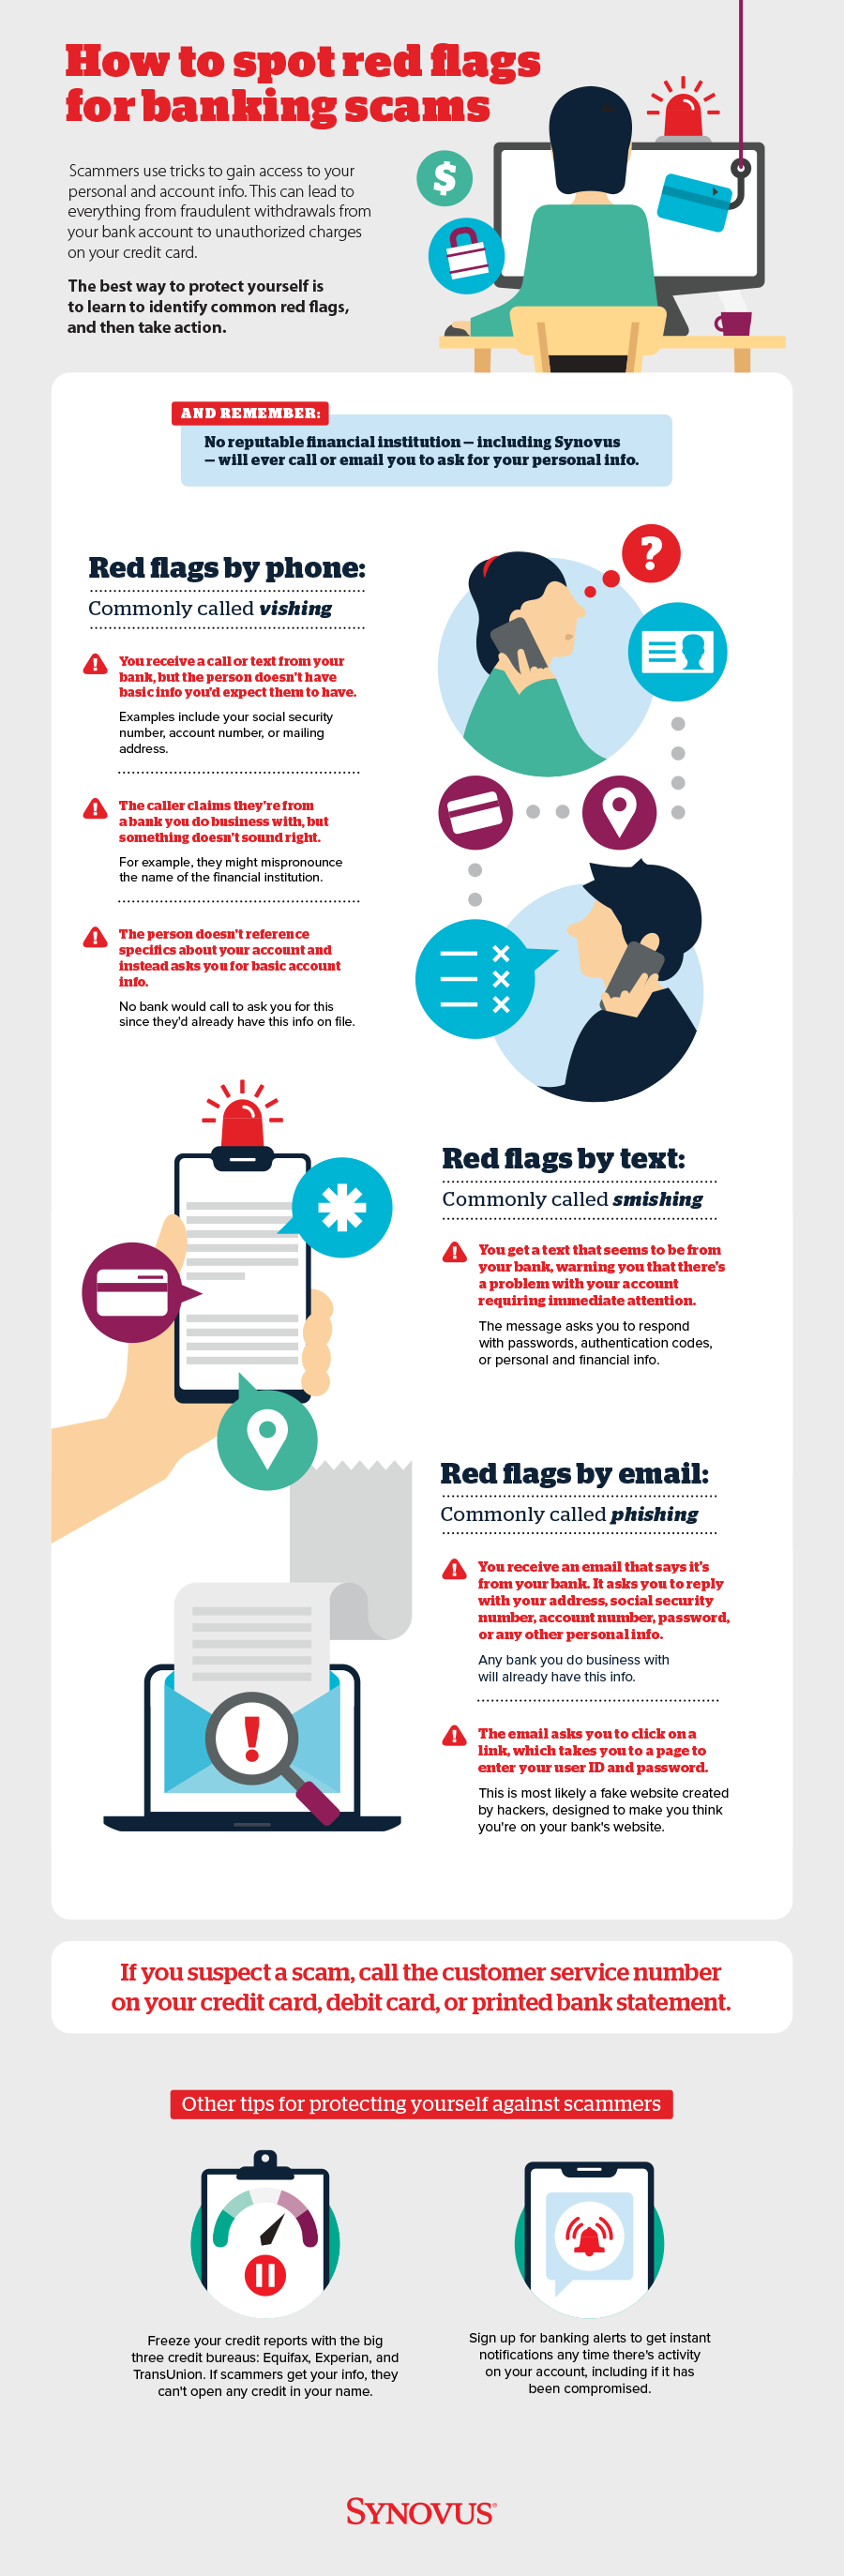 Infographic describing ways to stay safe while online shopping. A full description is available through a link beneath the image.